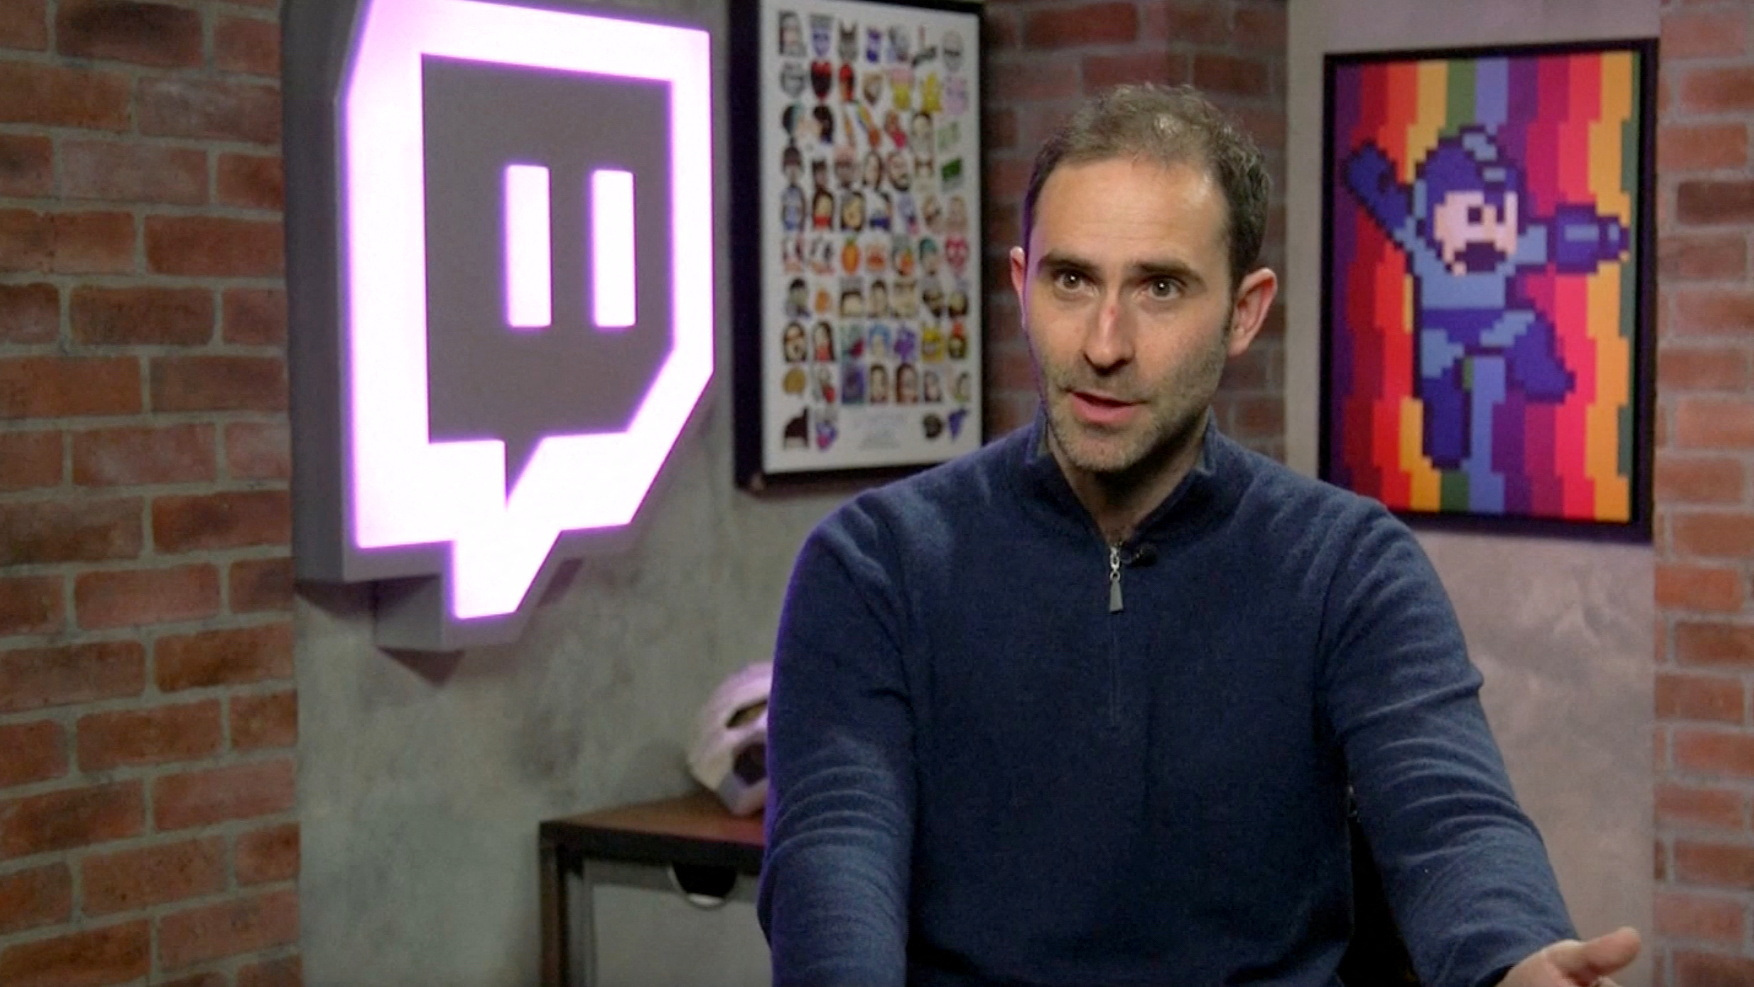 Twitch CEO Emmett Shear speaks in a still image taken from a video interview with Reuters